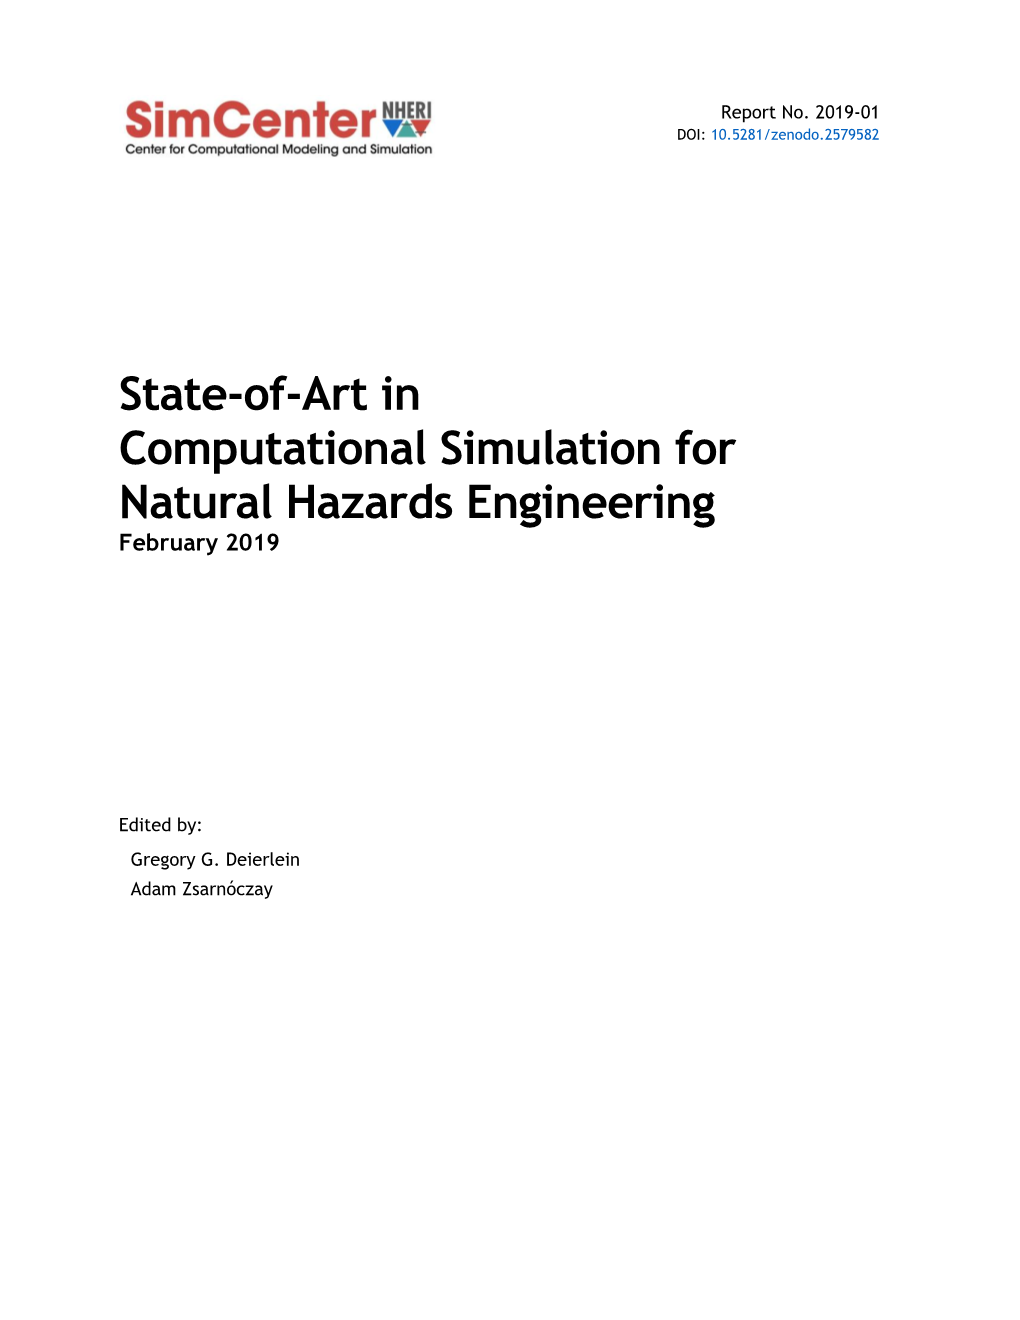 State-Of-Art in Computational Simulation for Natural Hazards Engineering February 2019